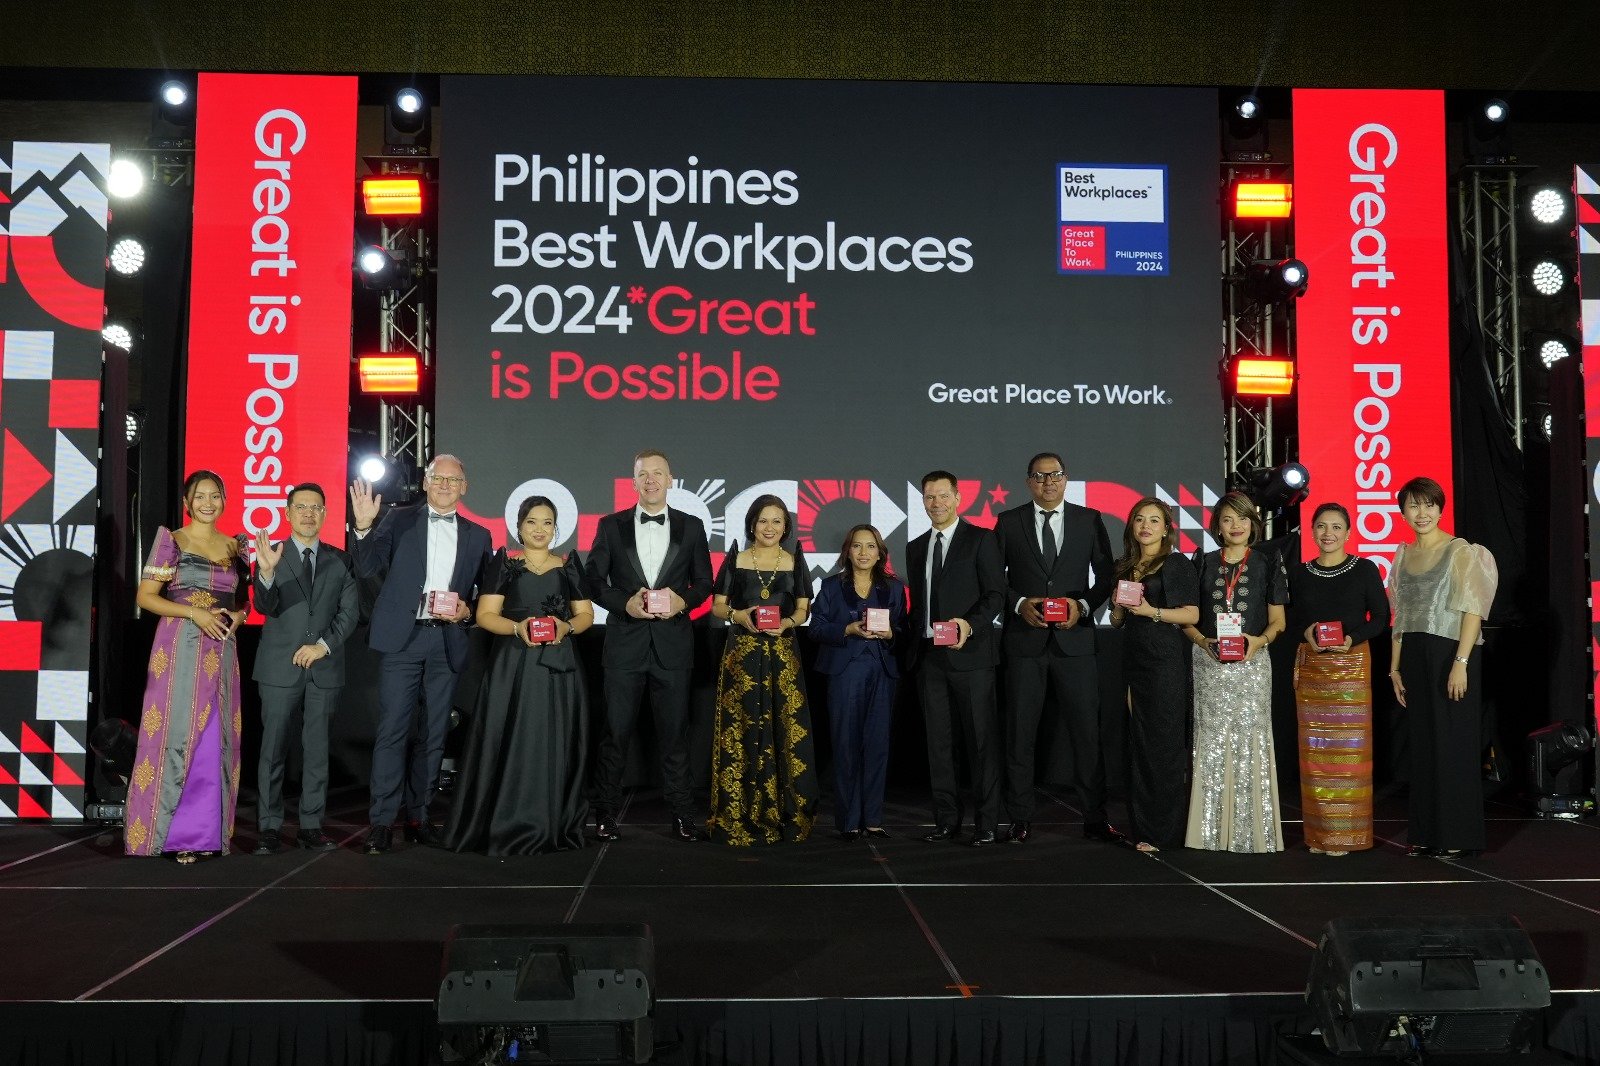 Top 35 Best Workplaces TM in Philippines List Revealed Showing ‘Great is Possible’ Amidst Evolving Workforce Landscape